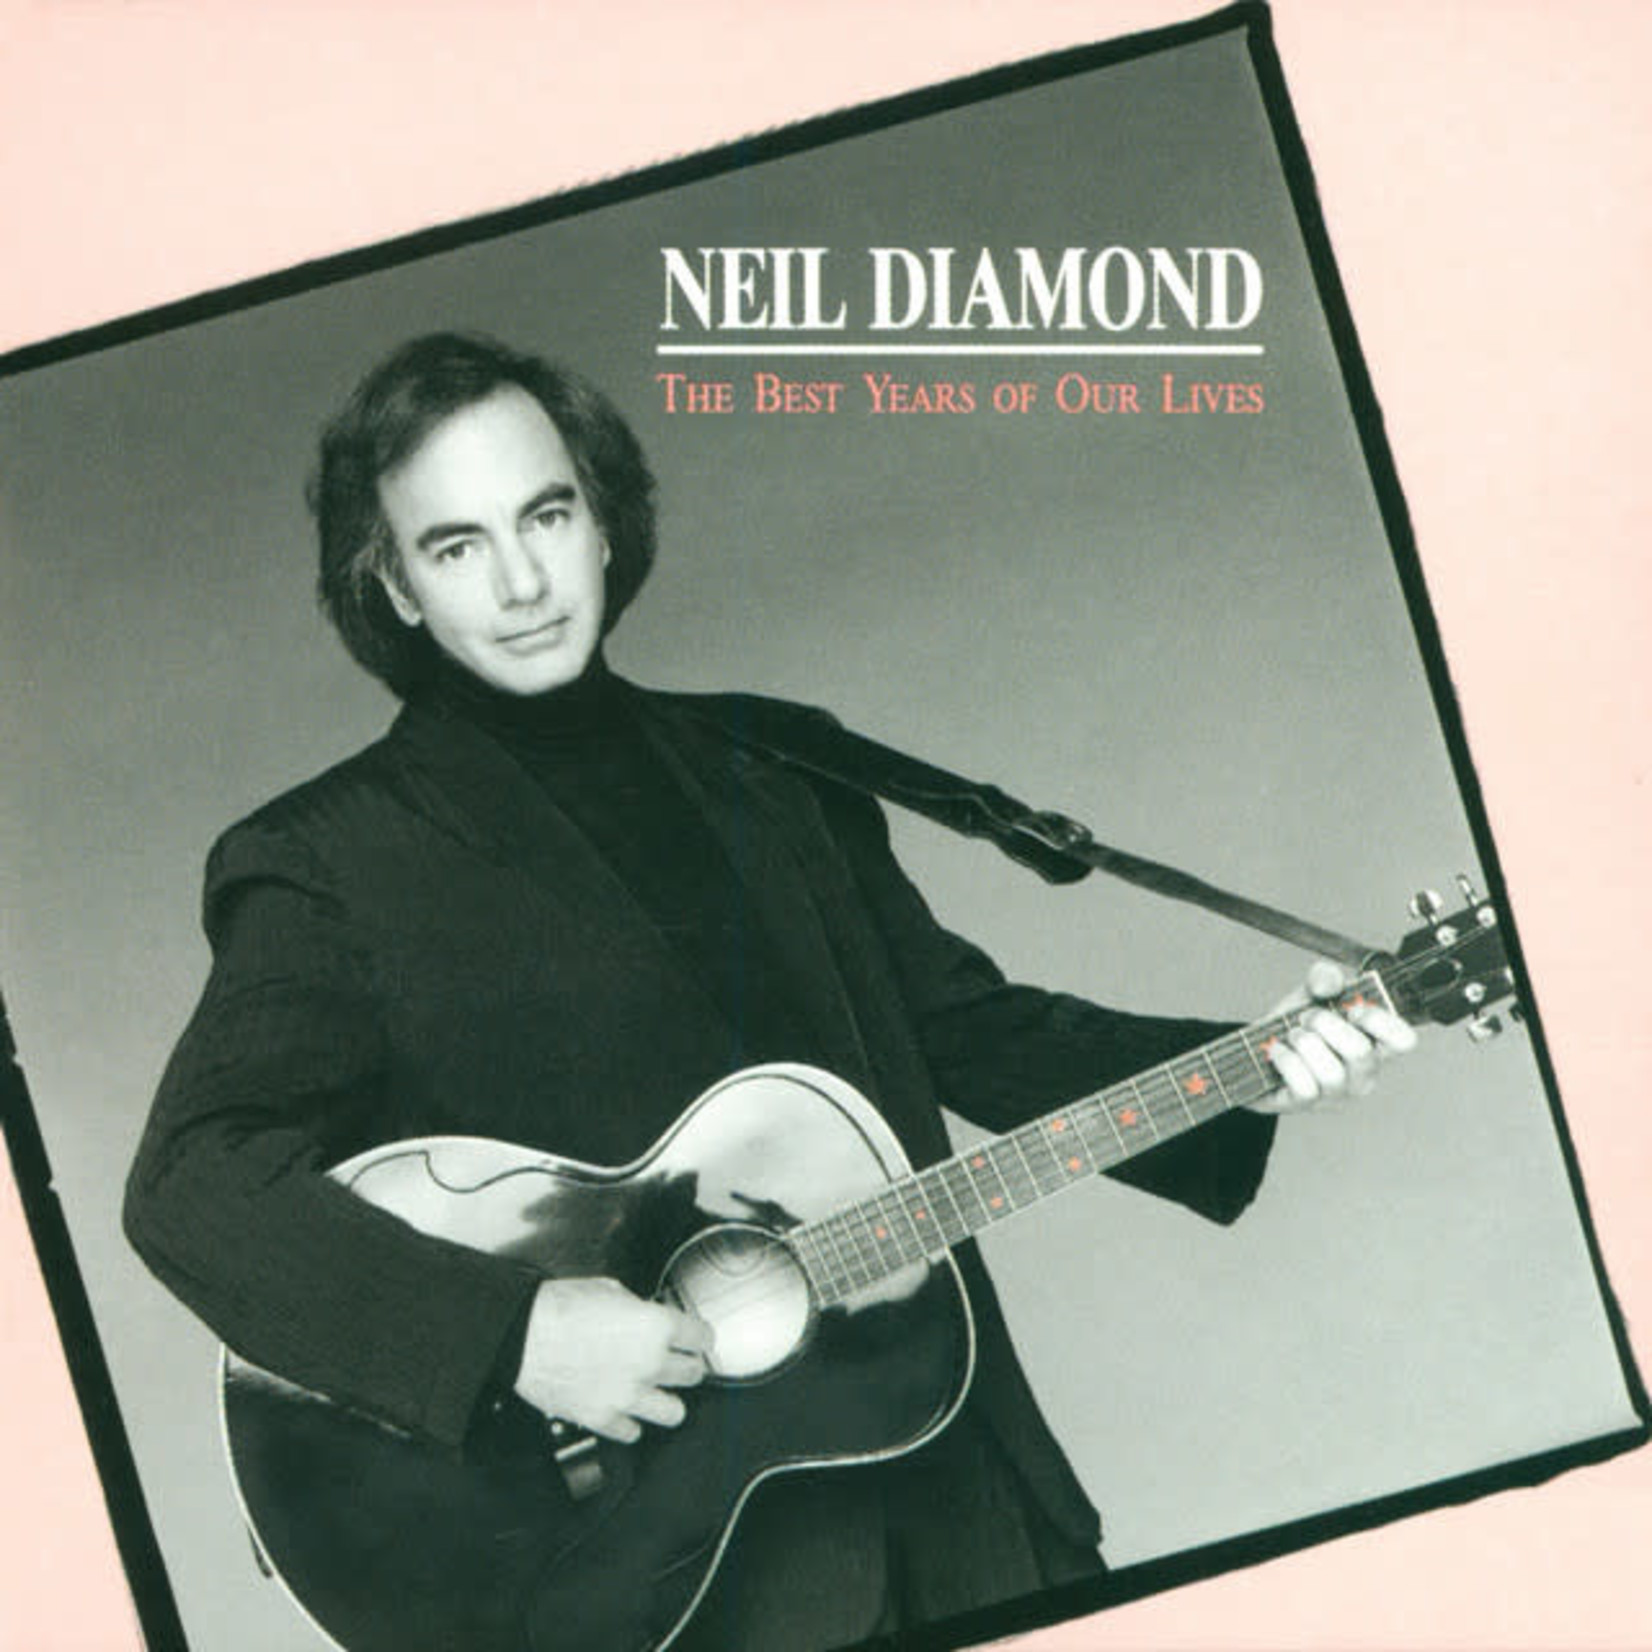 [Vintage] Neil Diamond - The Best Years of Our Lives